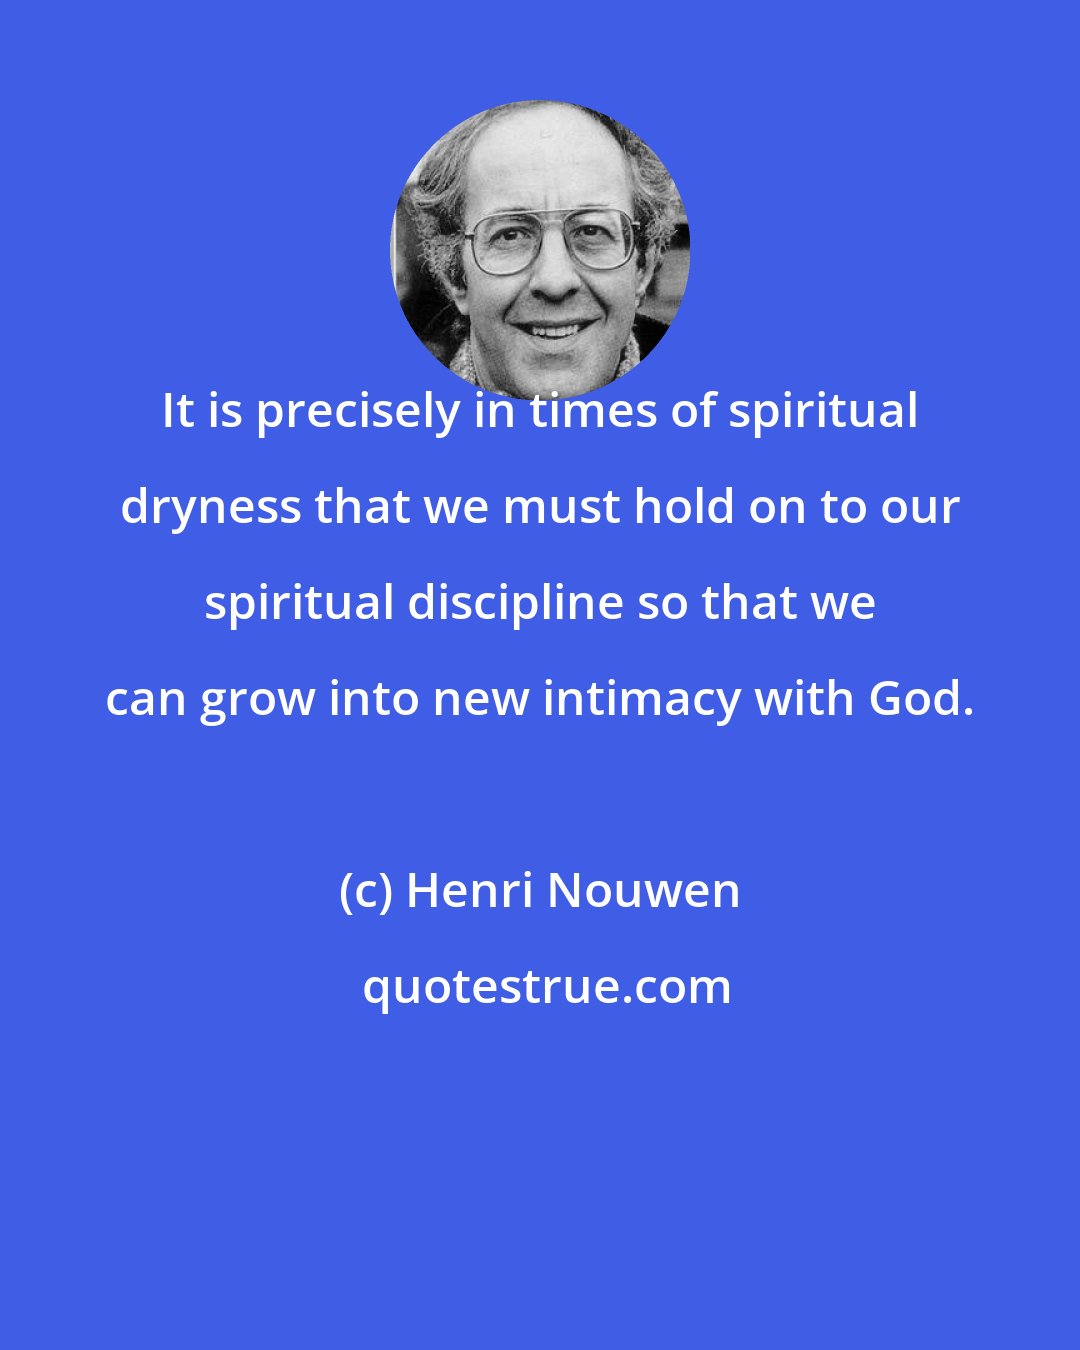 Henri Nouwen: It is precisely in times of spiritual dryness that we must hold on to our spiritual discipline so that we can grow into new intimacy with God.